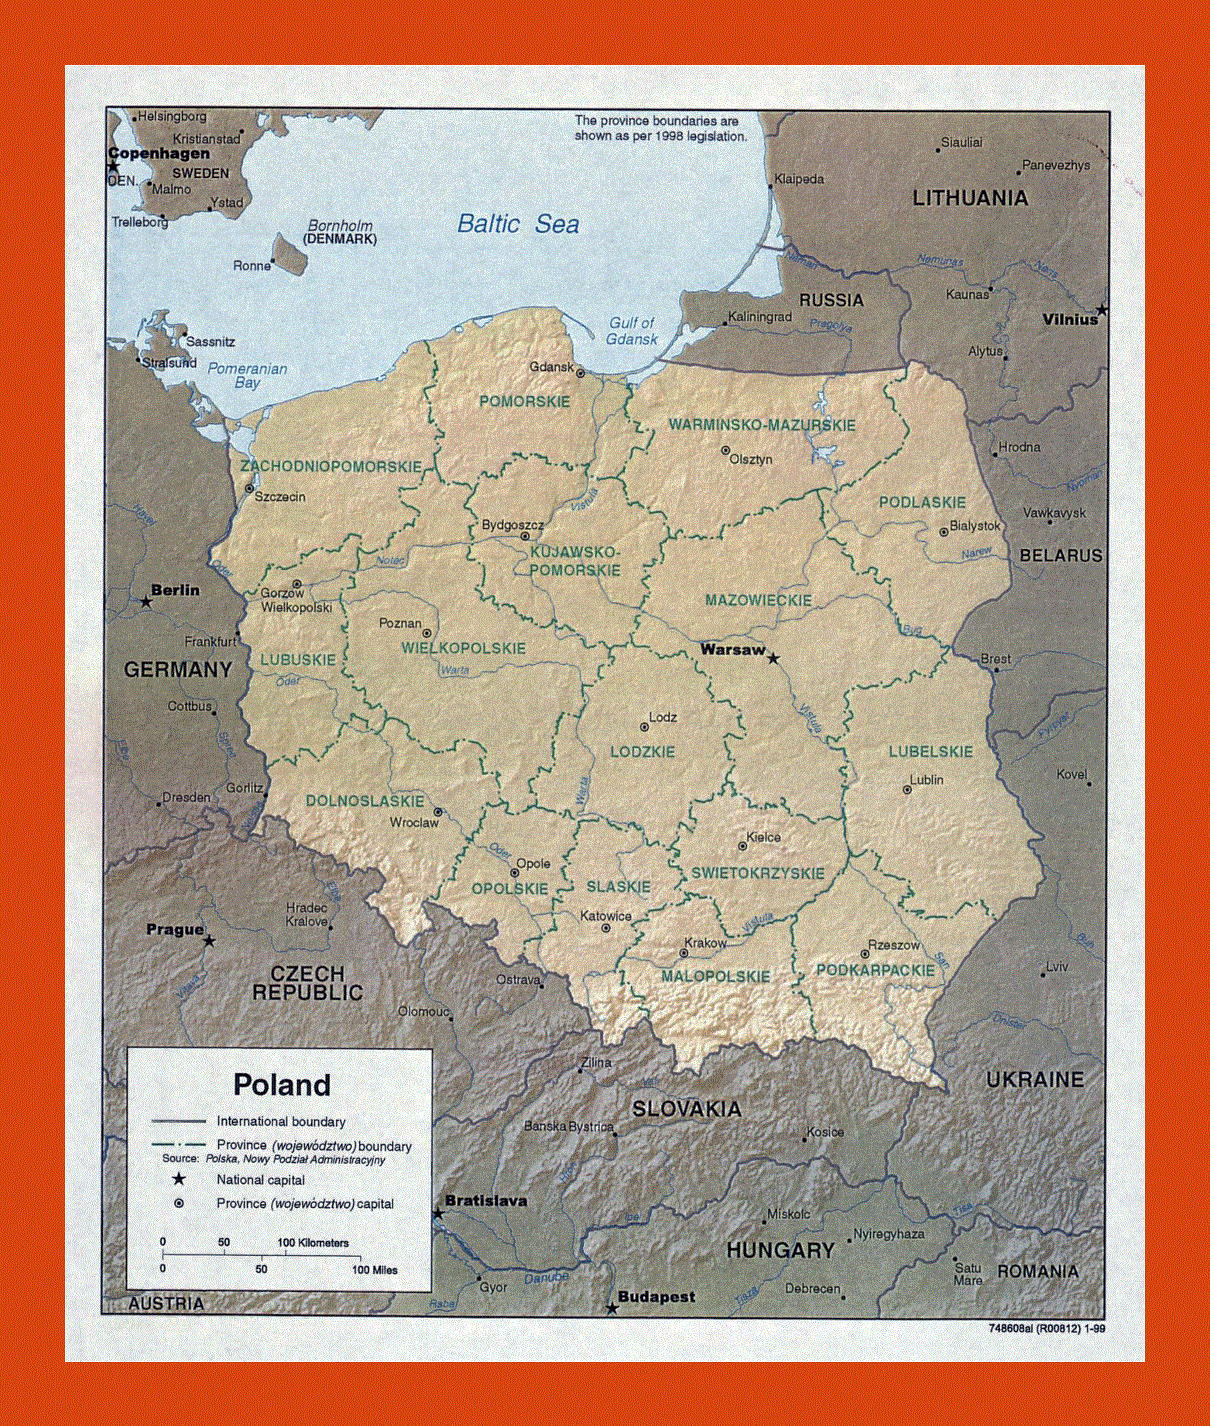 Political and administrative map of Poland - 1999